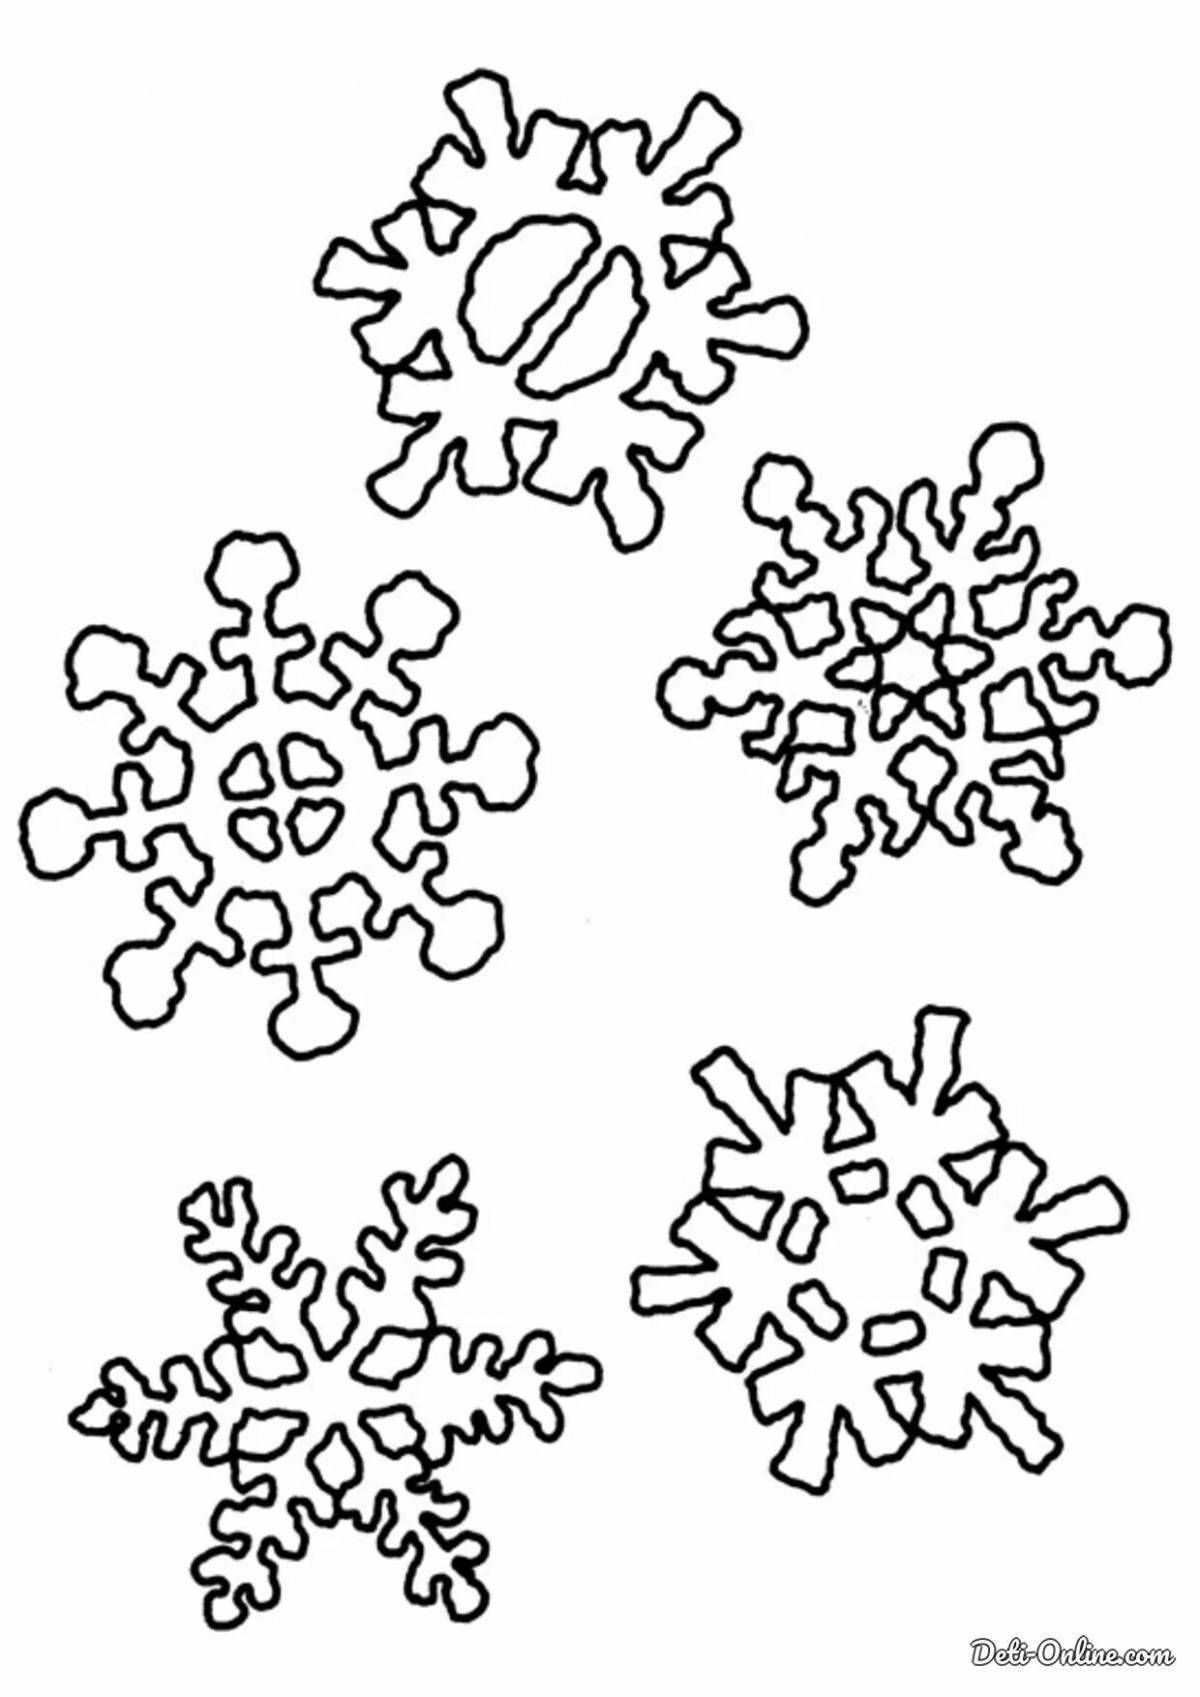 Shining snowflake coloring book for kids